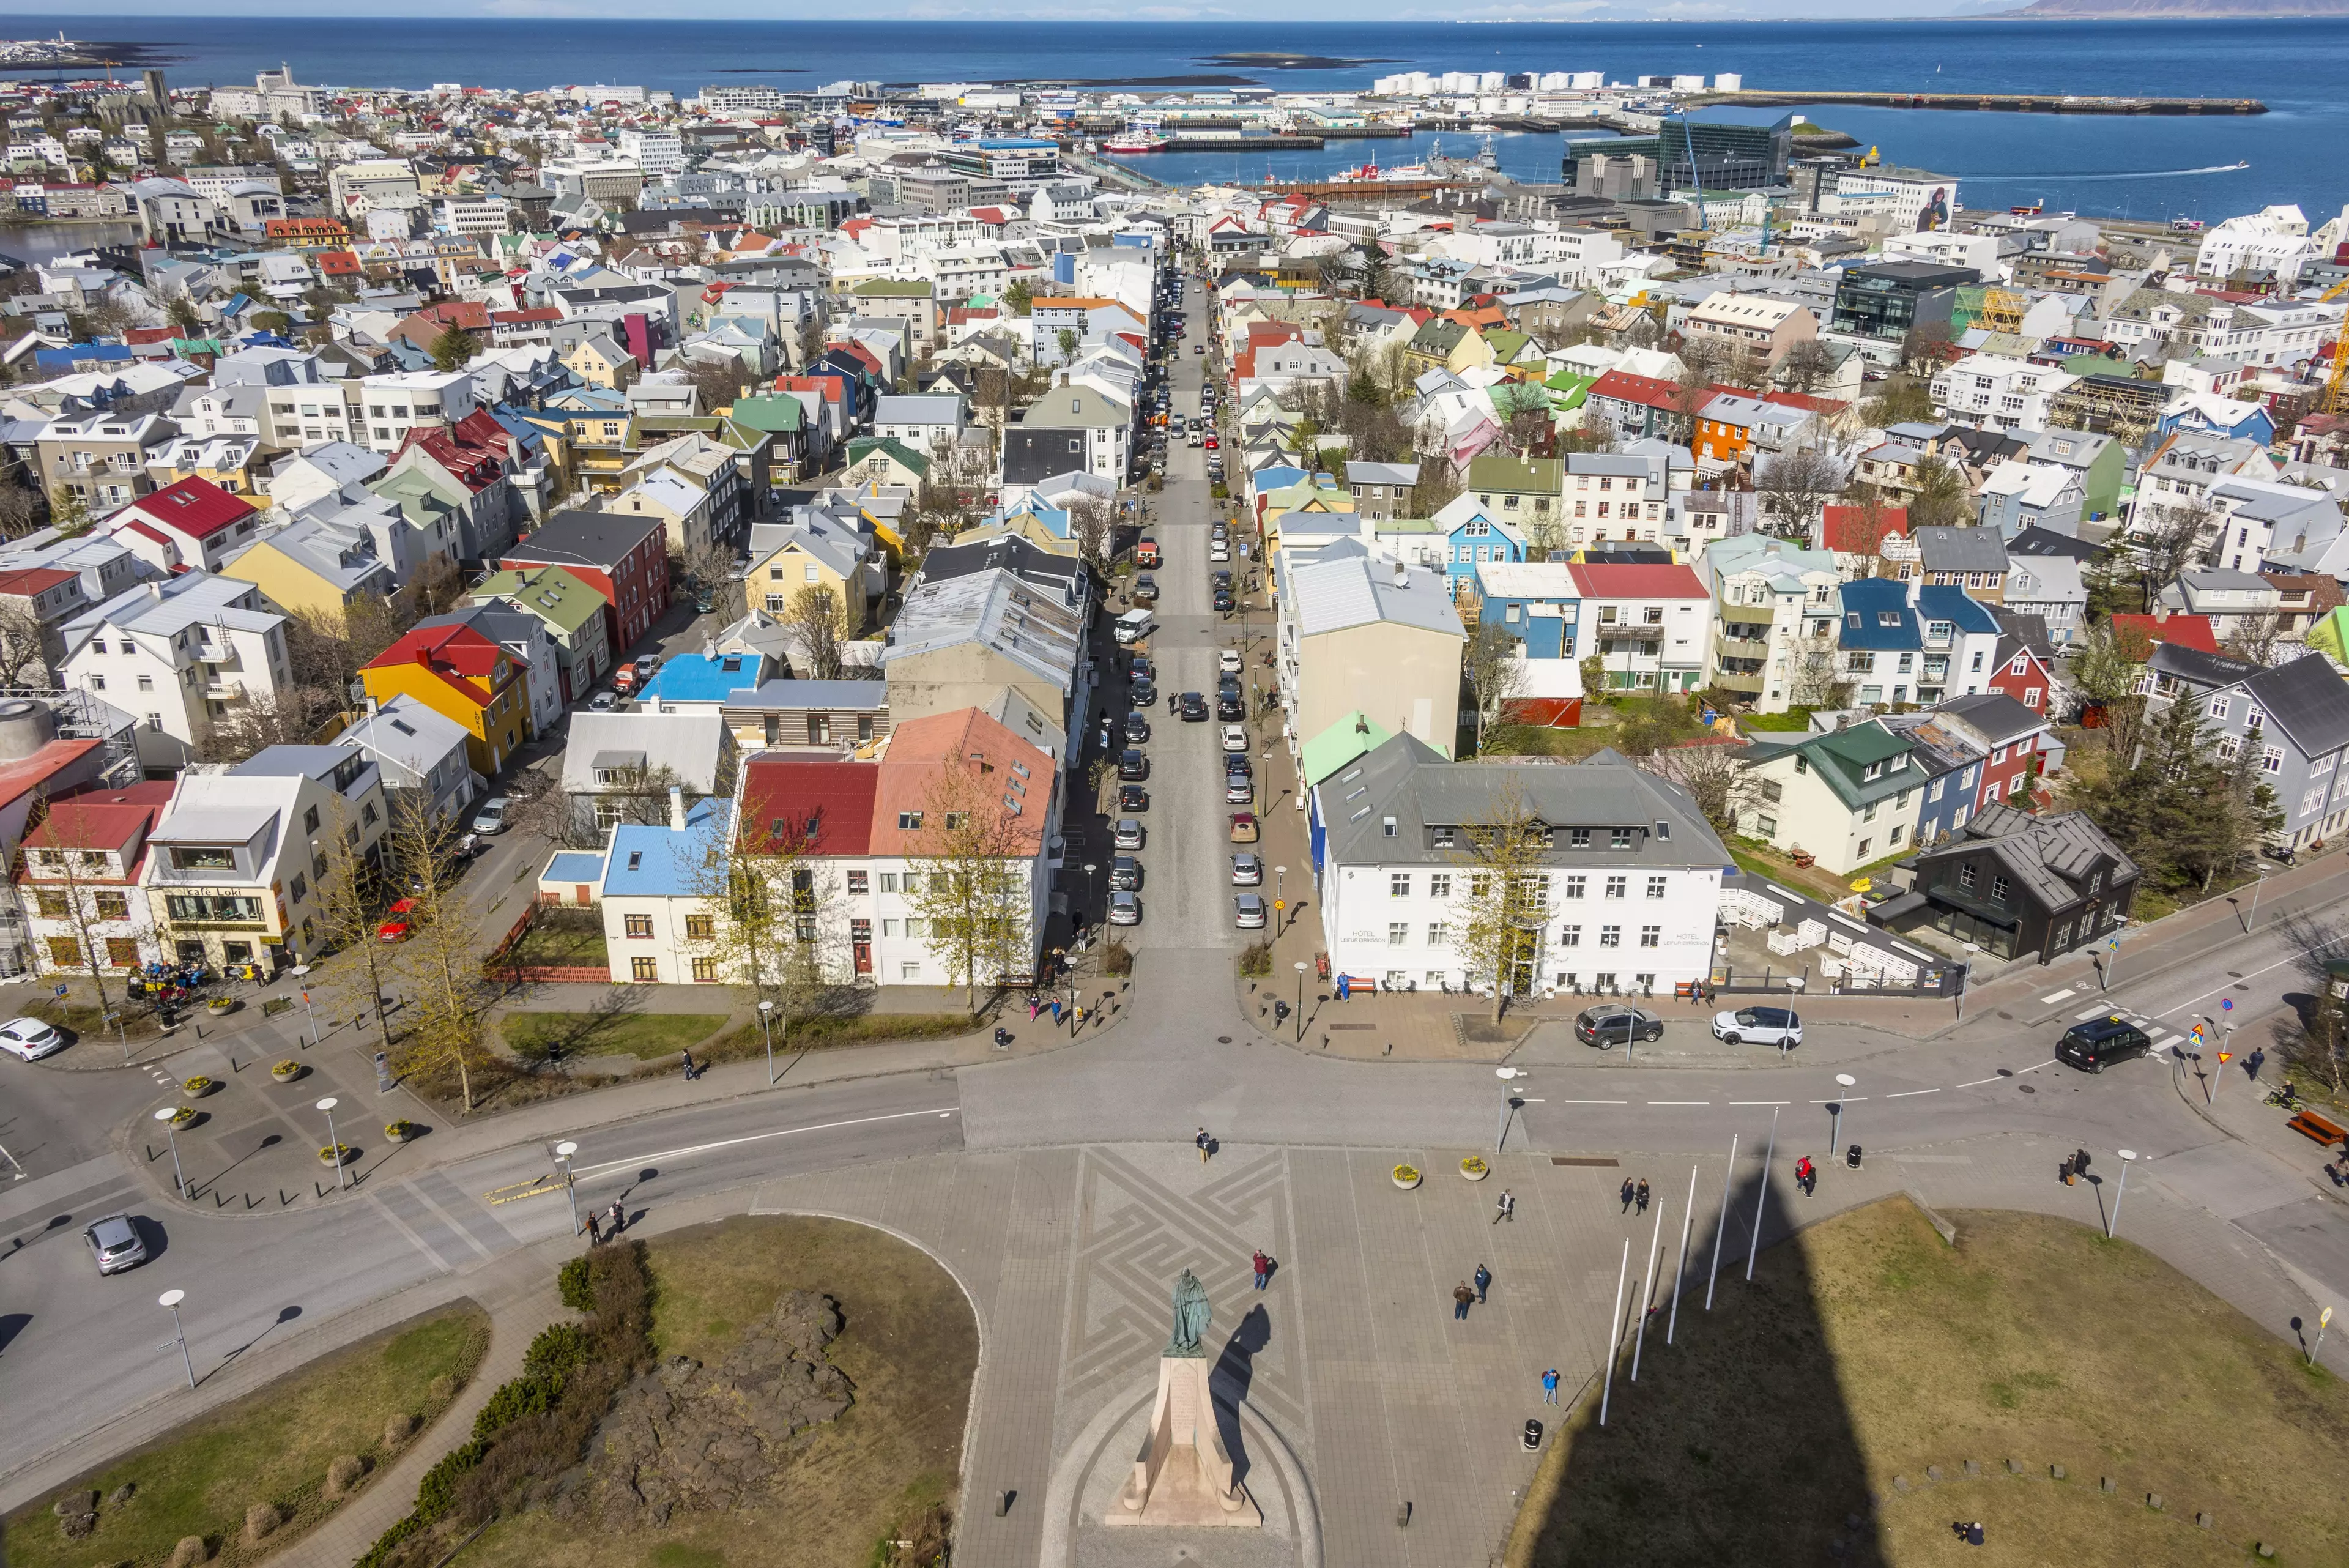 Reykjavik, where the trial took place.